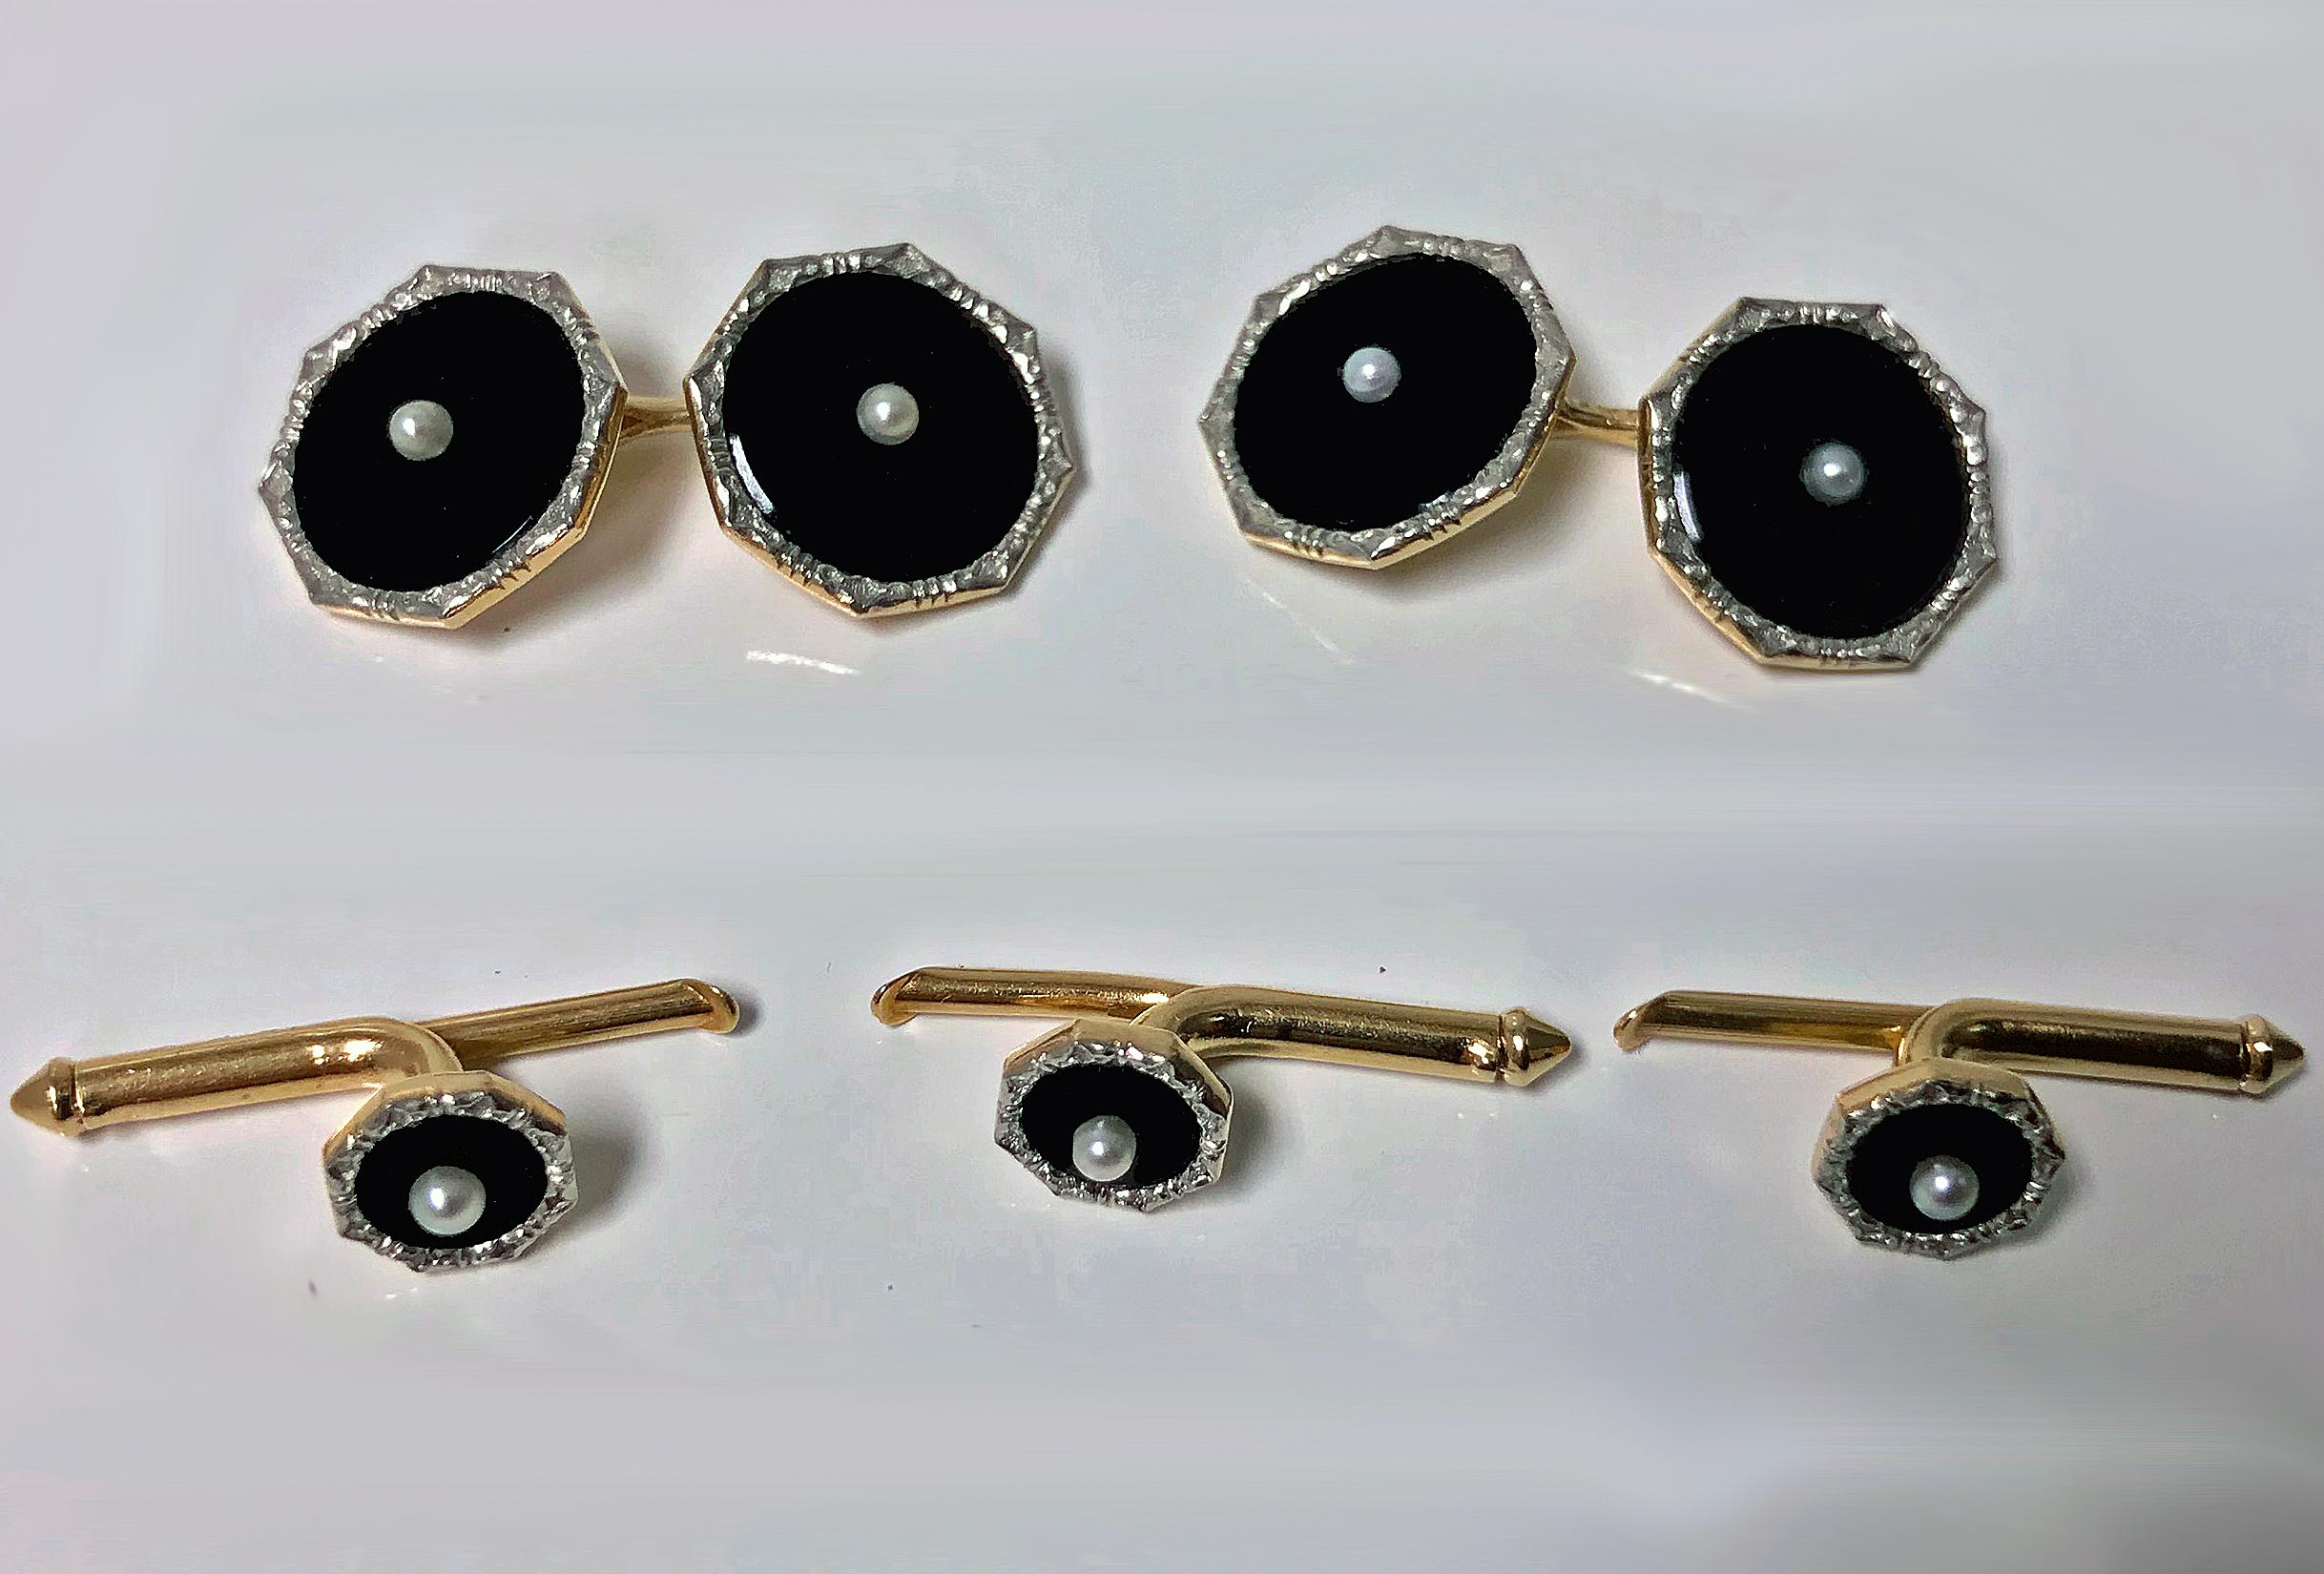 14K Gold, black Onyx and Pearl Cufflink and Stud set.  Each octagonal shaped circular piece centering a small natural Pearl on black onyx, the borders of chased white gold; comprising pair of Cufflinks and three studs with gold slide spring